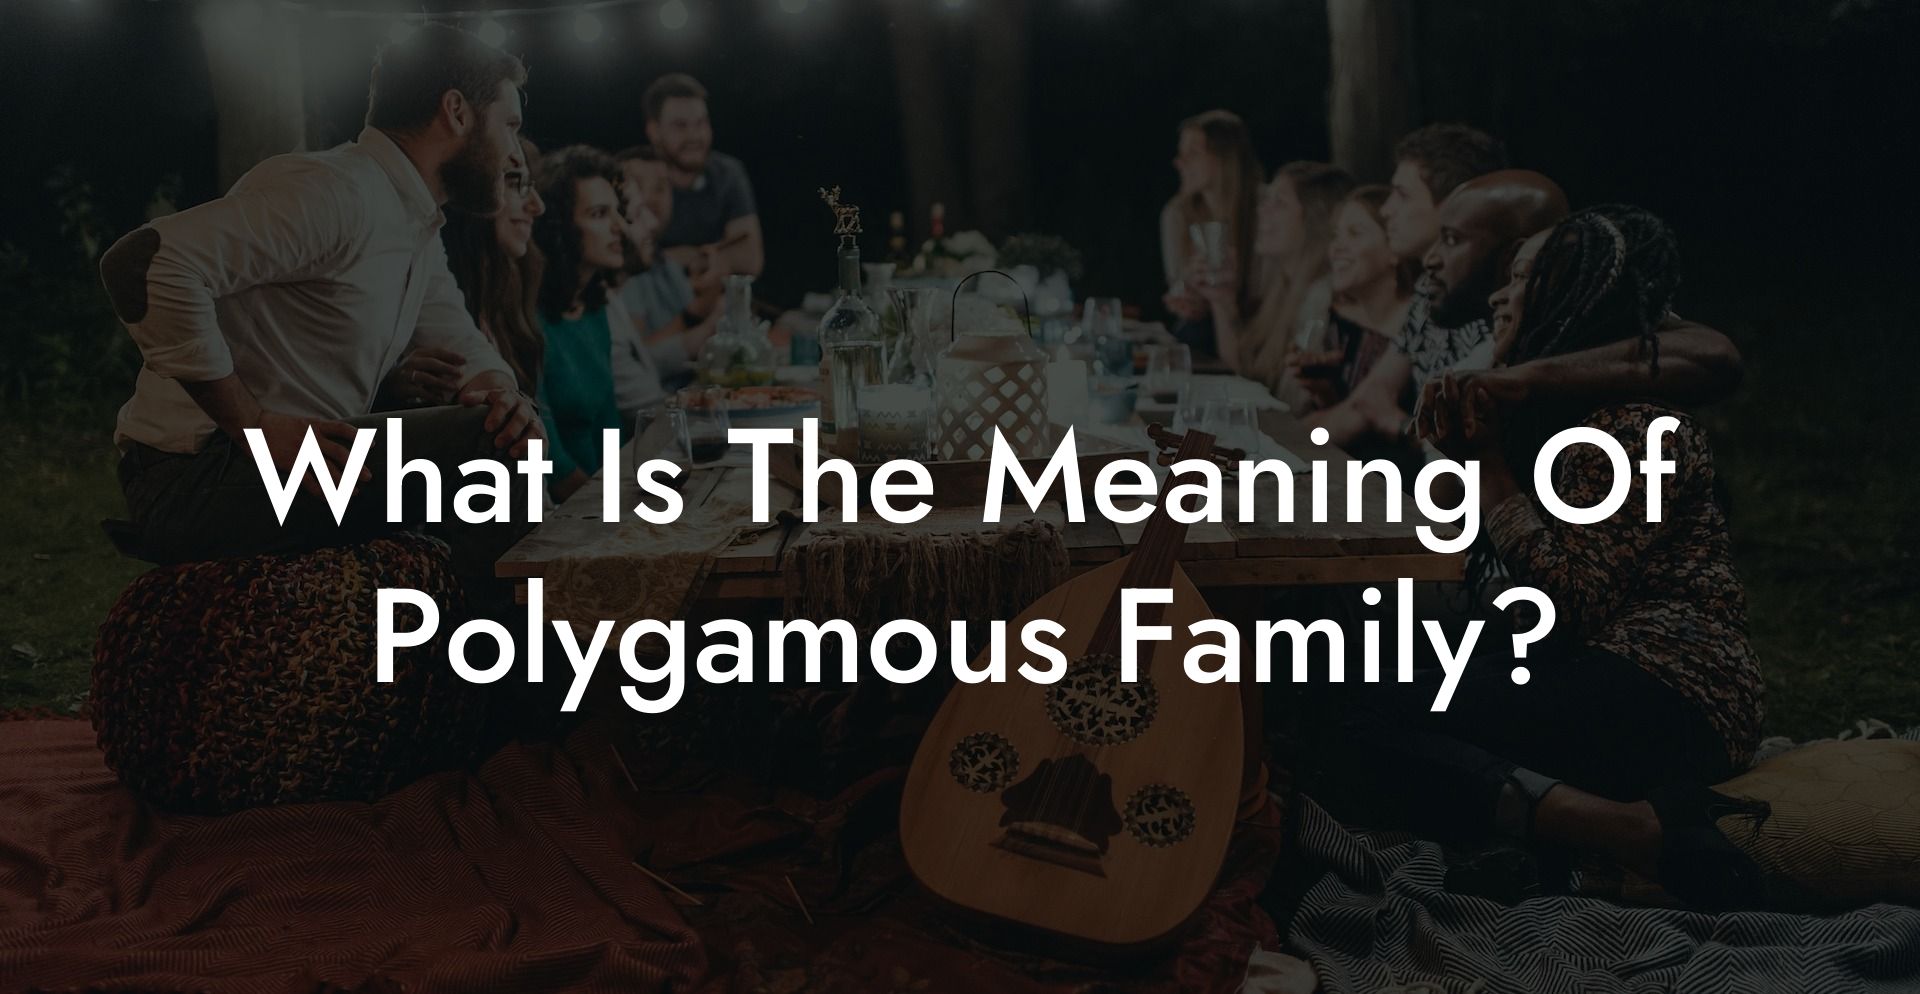 What Is The Meaning Of Polygamous Family?